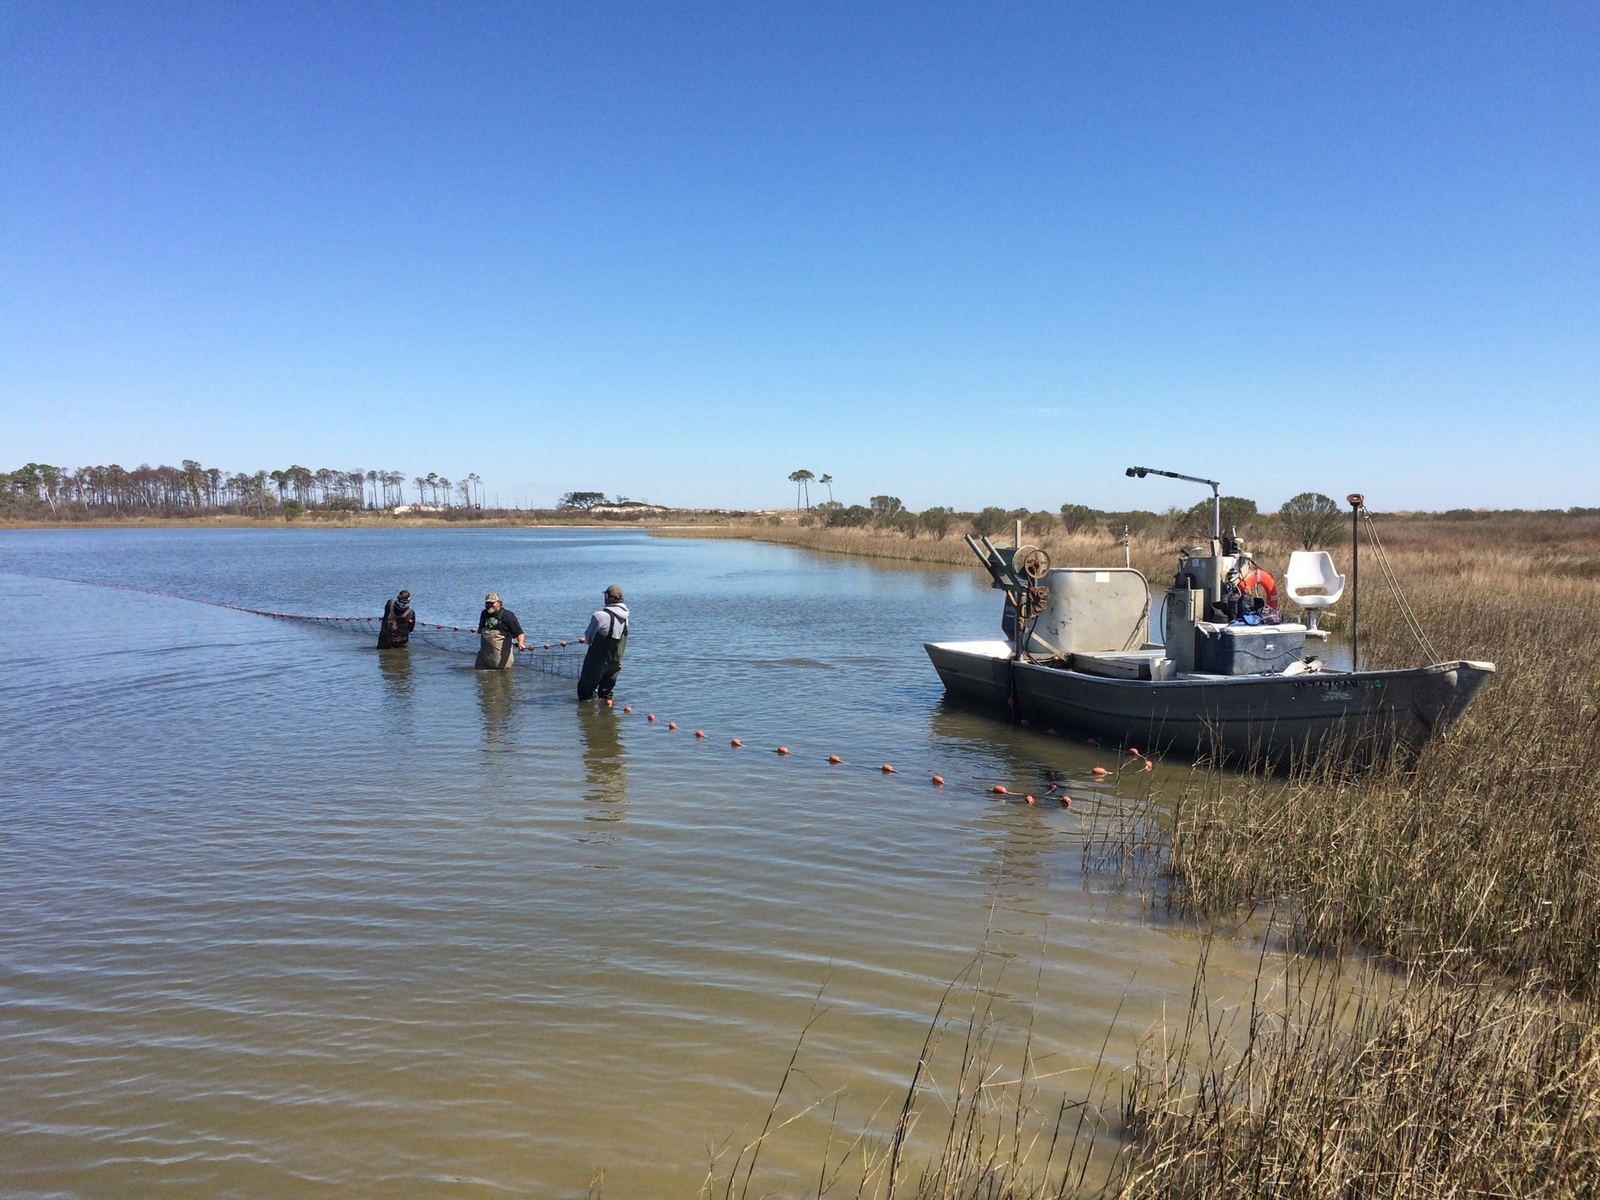 Near miss on net ban: Mississippi fishermen win one battle with the CCA